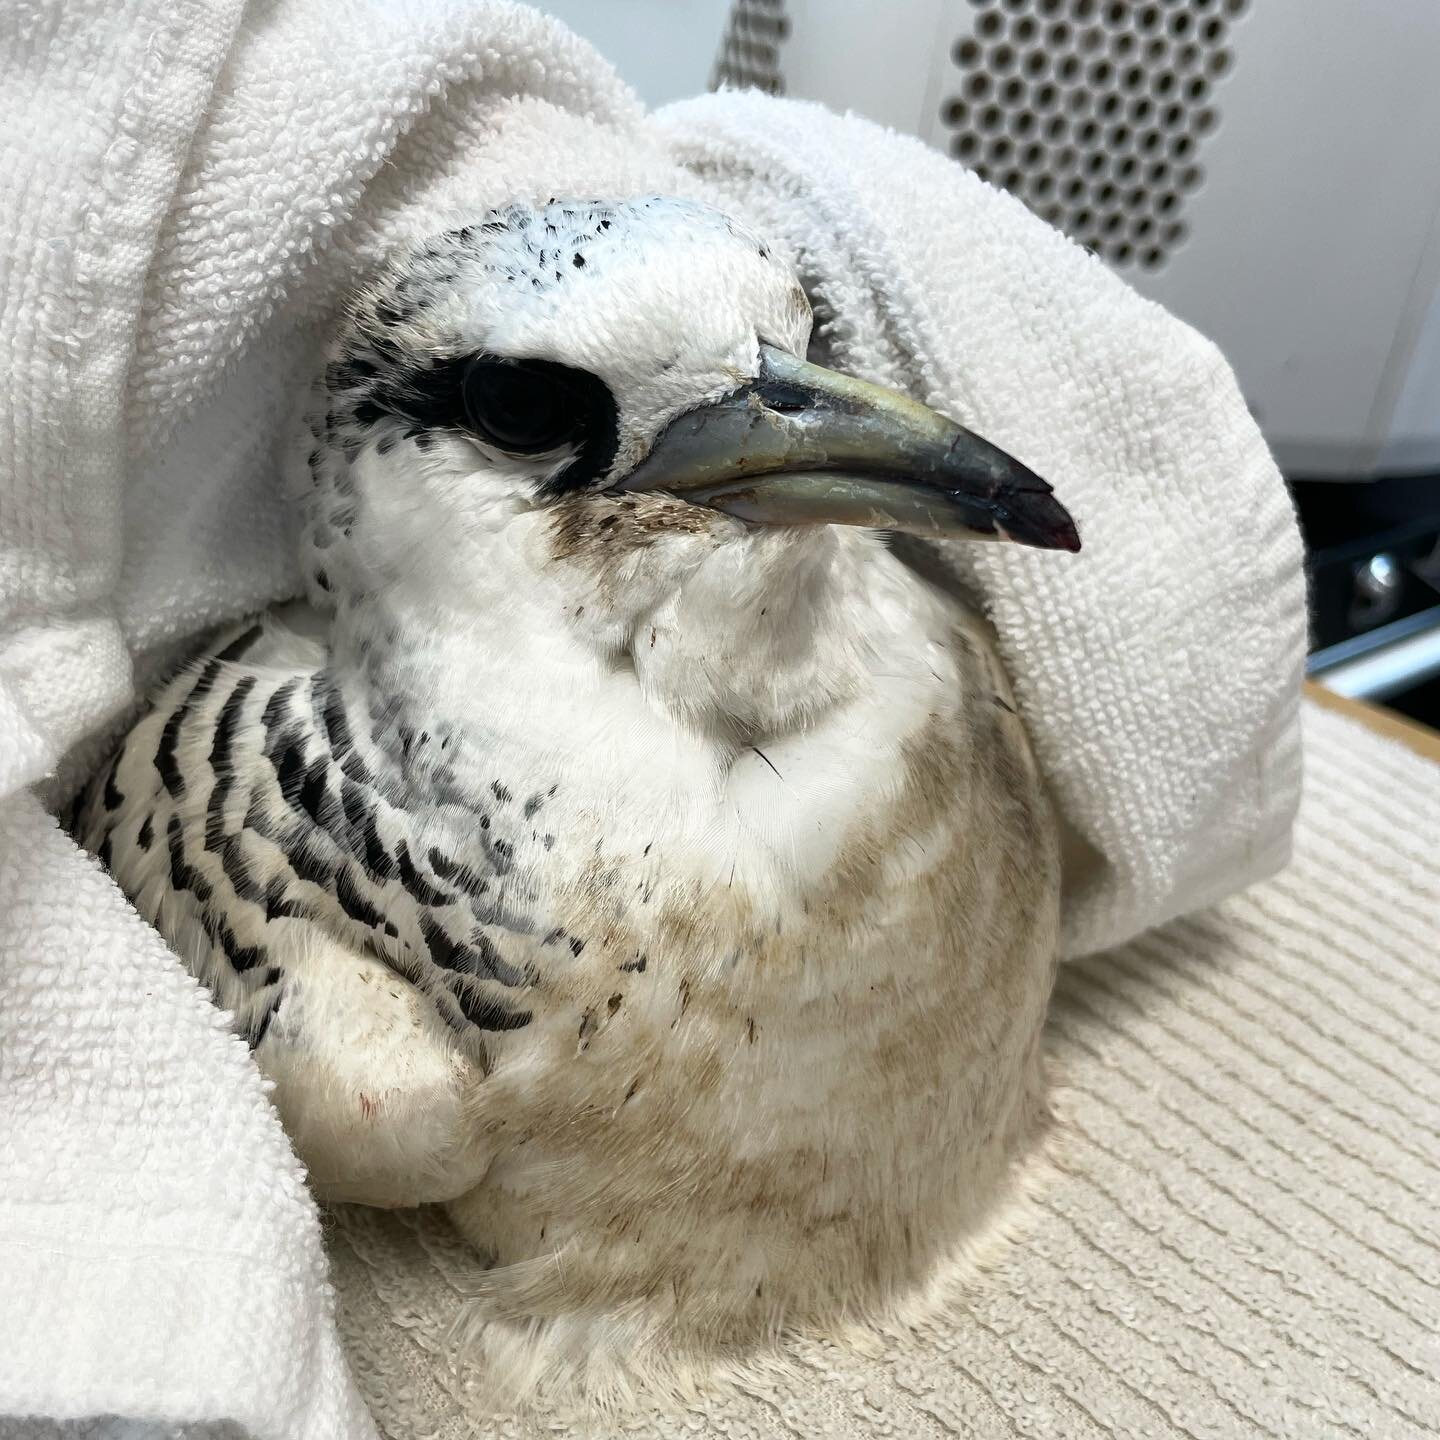 It&rsquo;s been a busy day here at SOS! We released 5 patients earlier today which included this White-tailed Tropicbird / Koa'e kea (following lots of pooling 😝) that had a damaged bill tip from a collision. In total we released 3 white-tailed trop